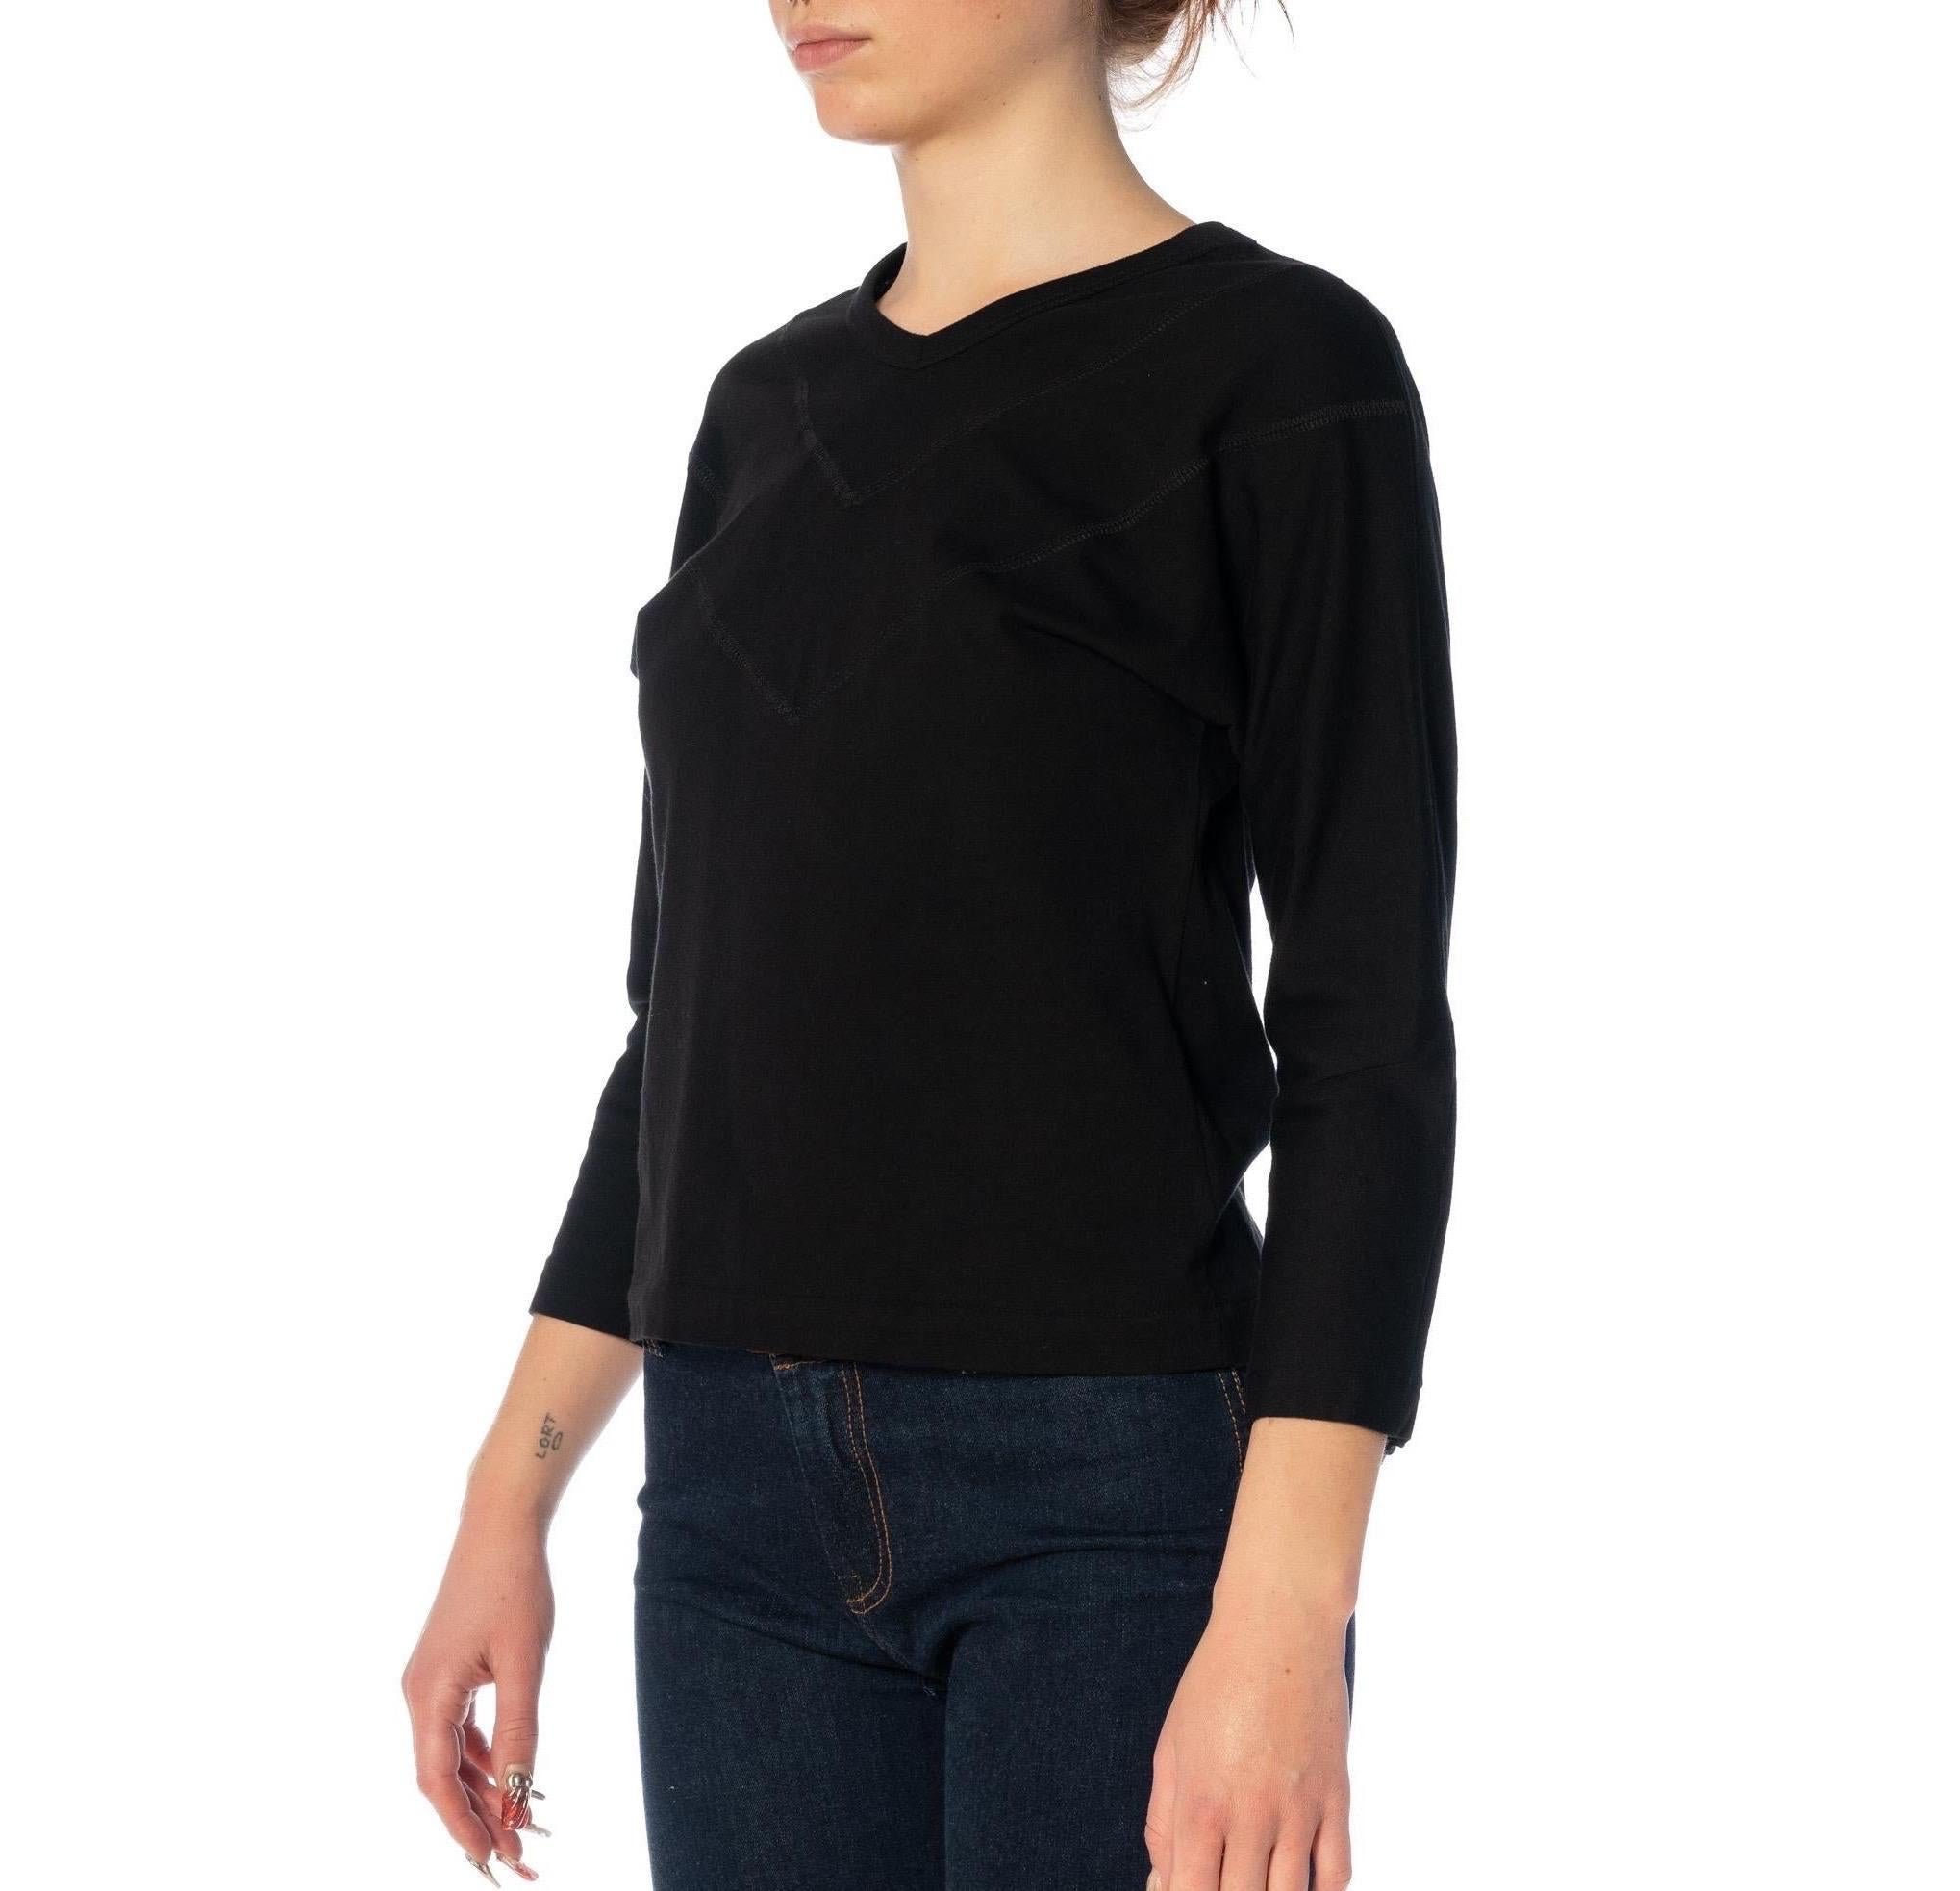 2010S COMME DES GARCONS Black Cotton Long Sleeve Shirt With Stitching Detail, 2 For Sale 5